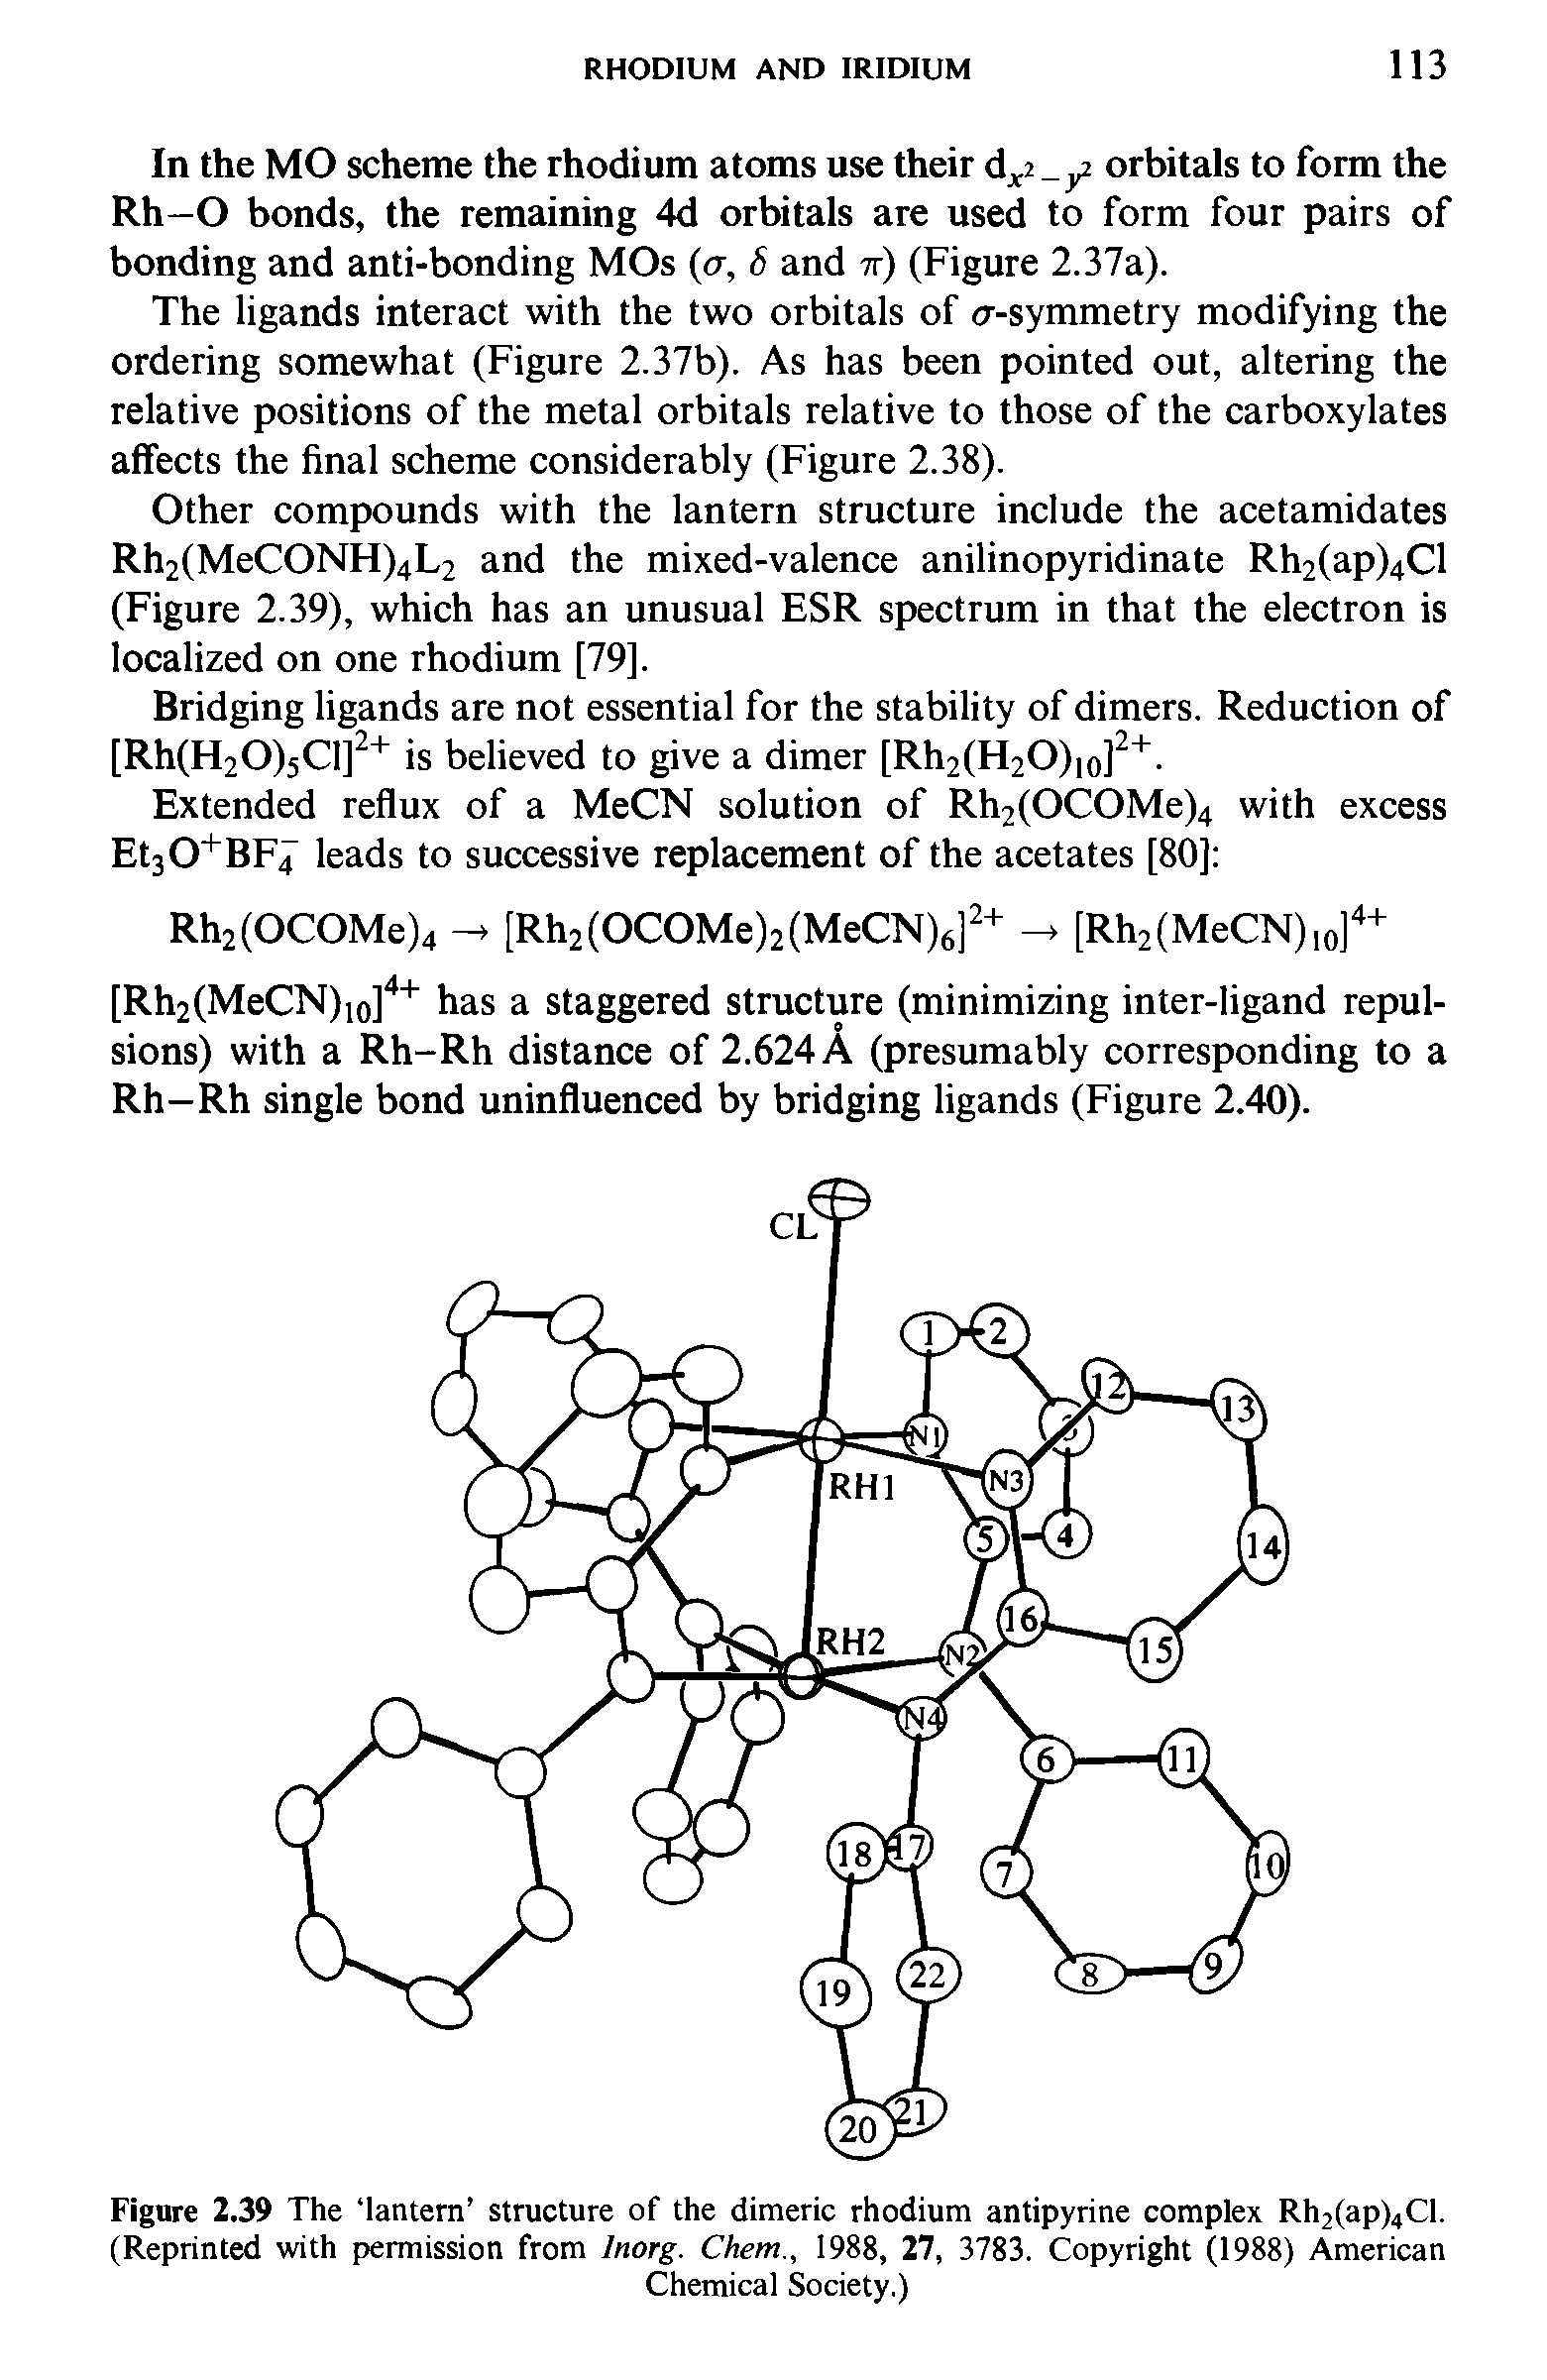 Figure 2.39 The lantern structure of the dimeric rhodium antipyrine complex Rh2(ap)4Cl. (Reprinted with permission from Inorg. Chem., 1988, 27, 3783. Copyright (1988) American...